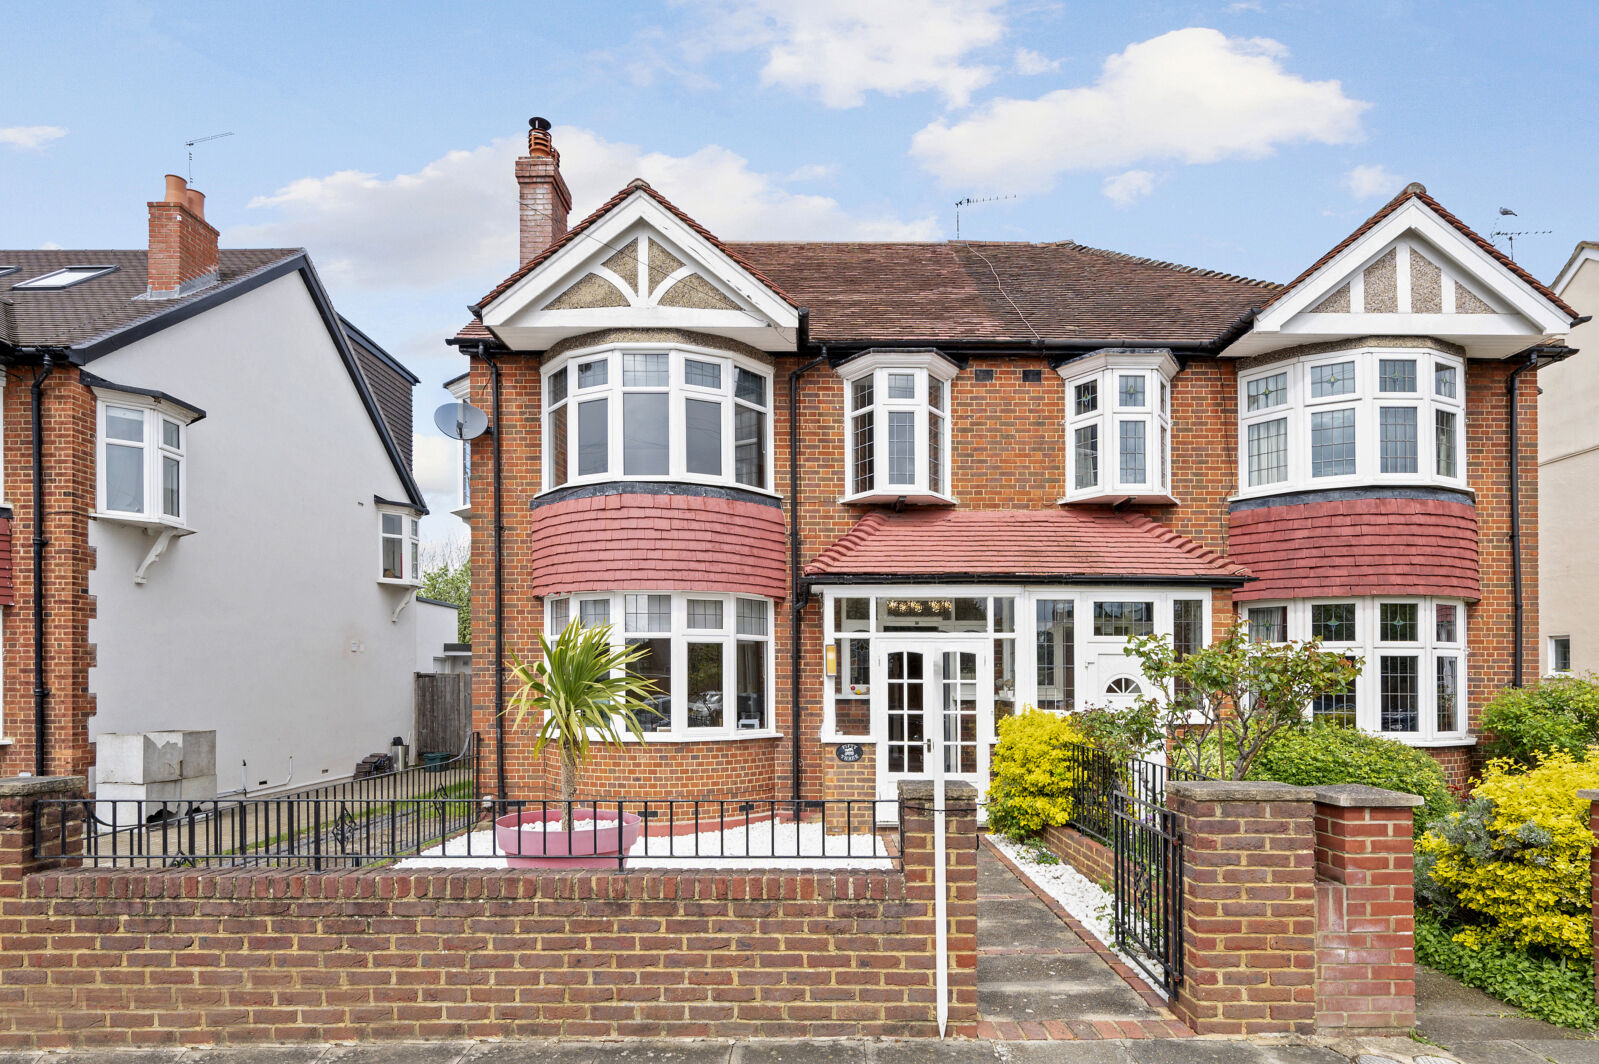 4 bedroom semi detached house for sale Linkway, Raynes Park, SW20, main image